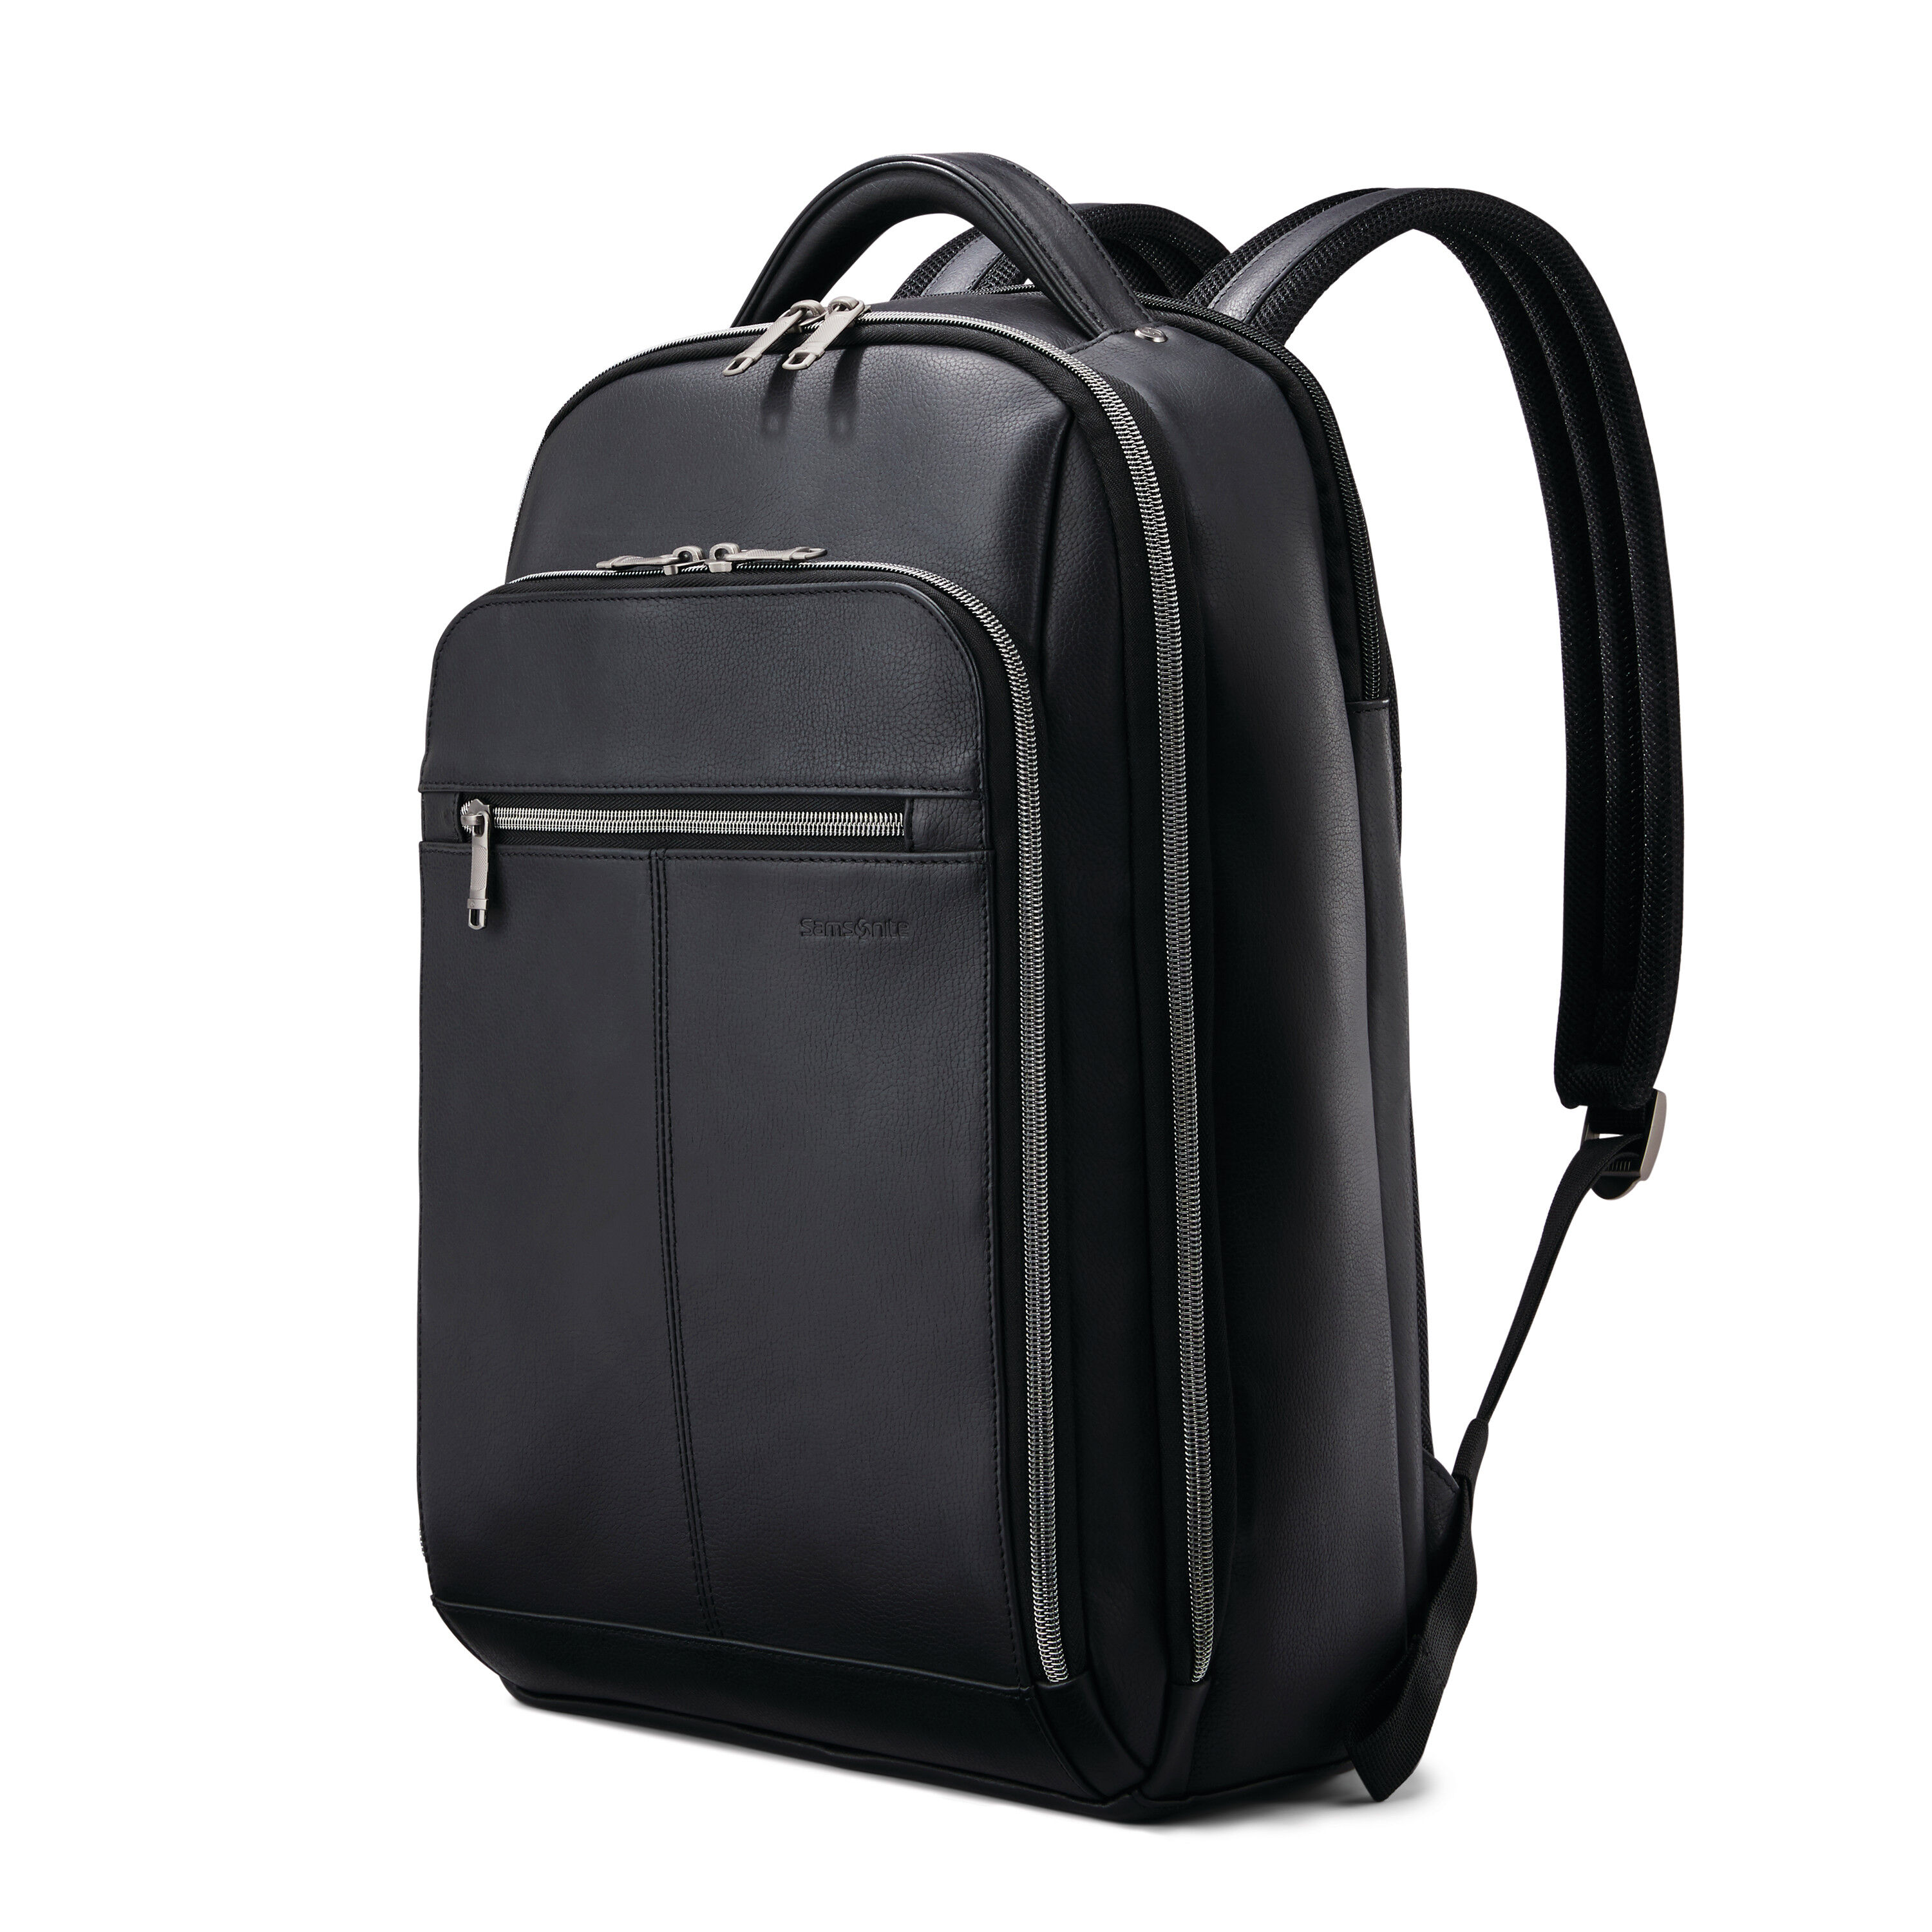 Buy Classic Leather Backpack for USD 146.99 | Samsonite US